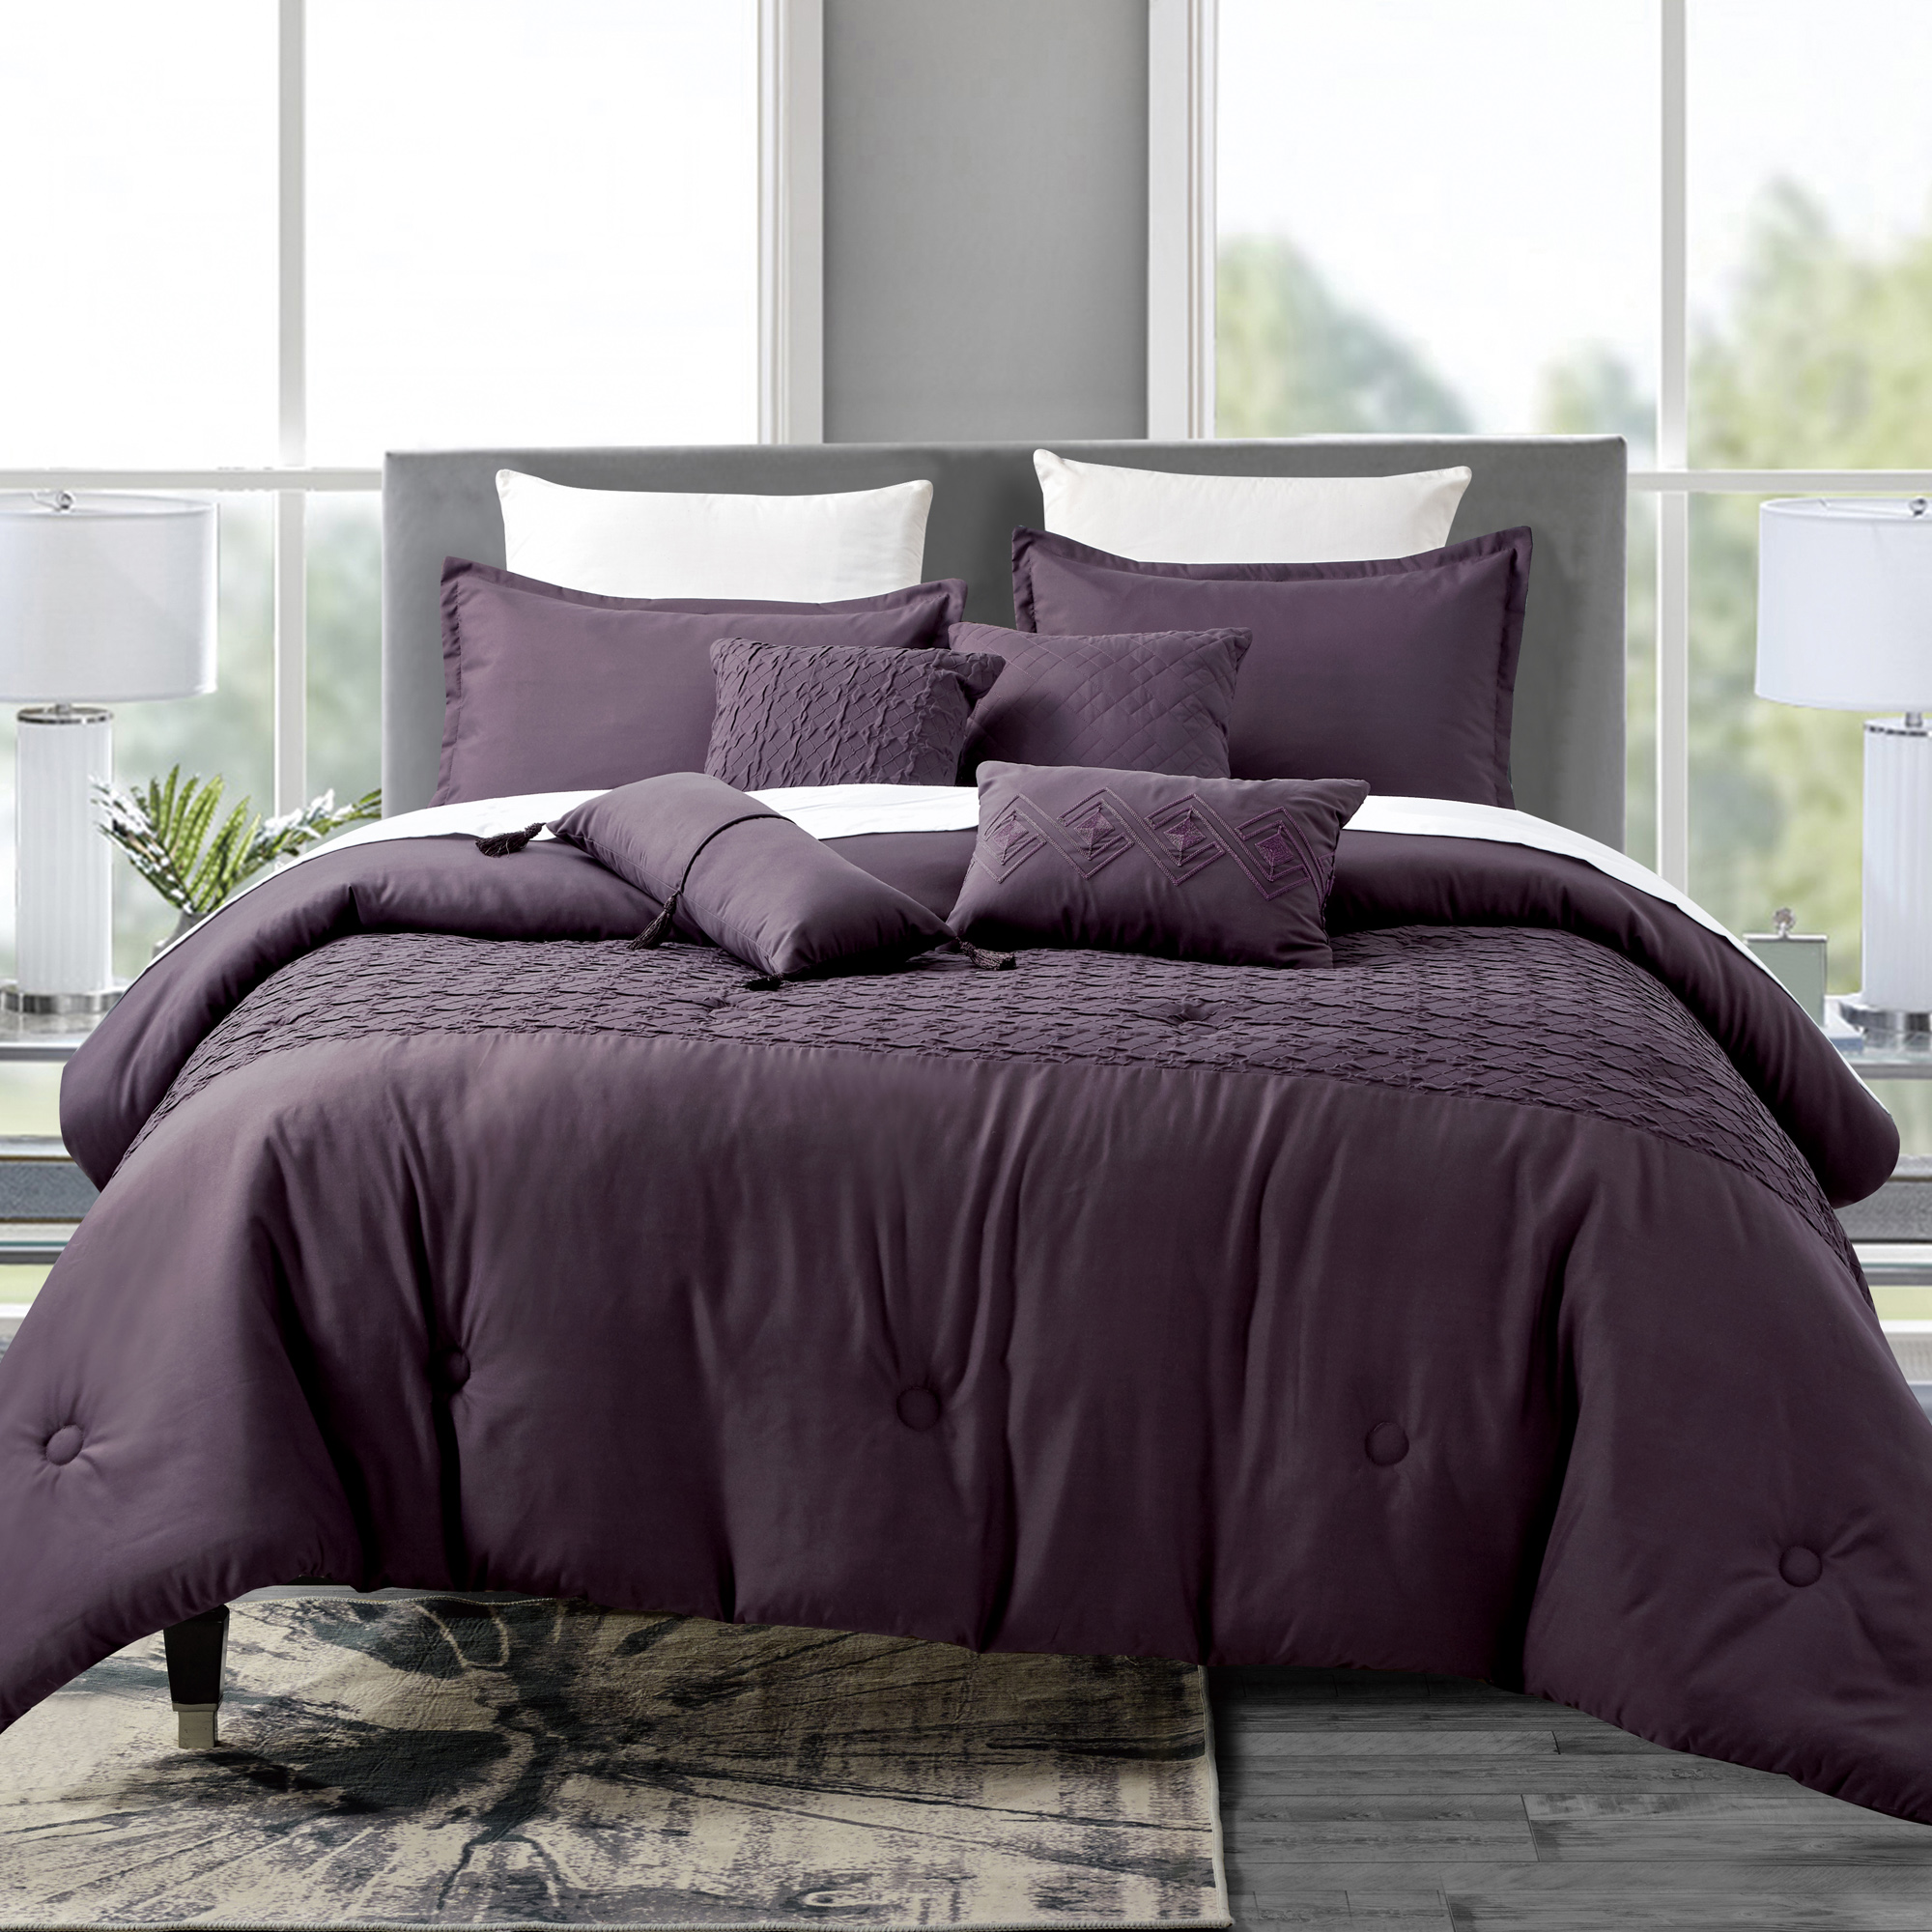 Bedding Comforter Set Luxury Bed, Luxury Bed In A Bag King